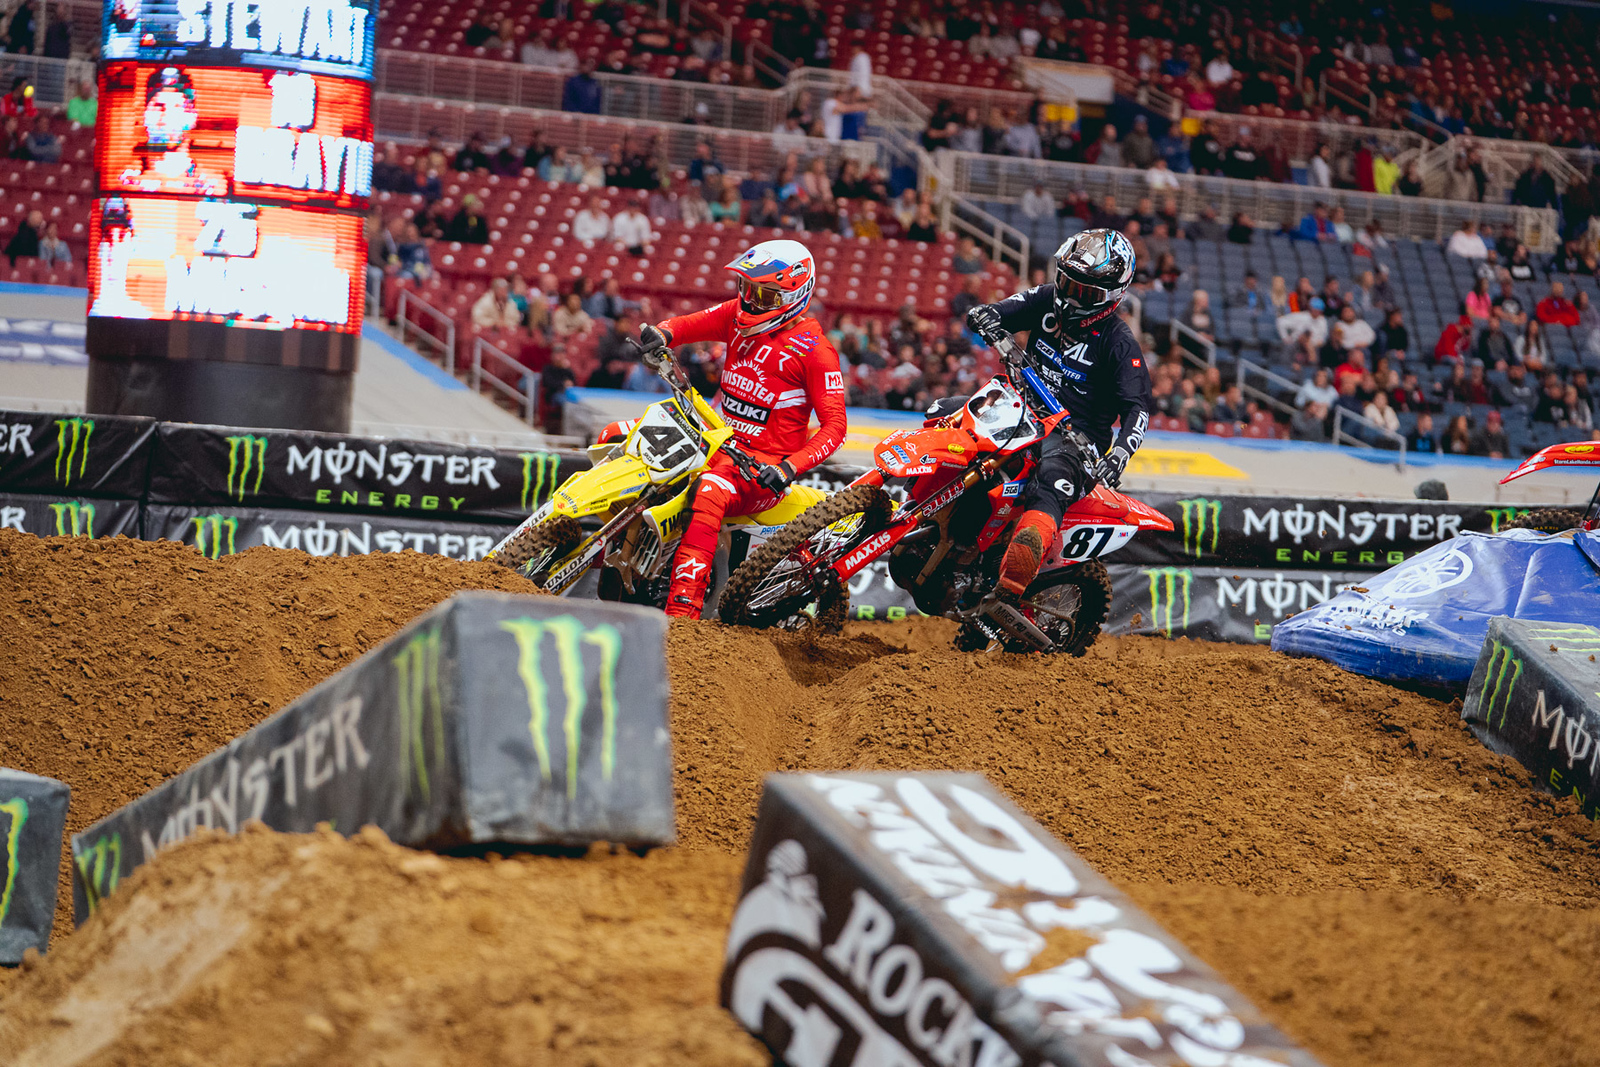 2022 St. Louis Supercross Qualifying Report & Times Swapmoto Live